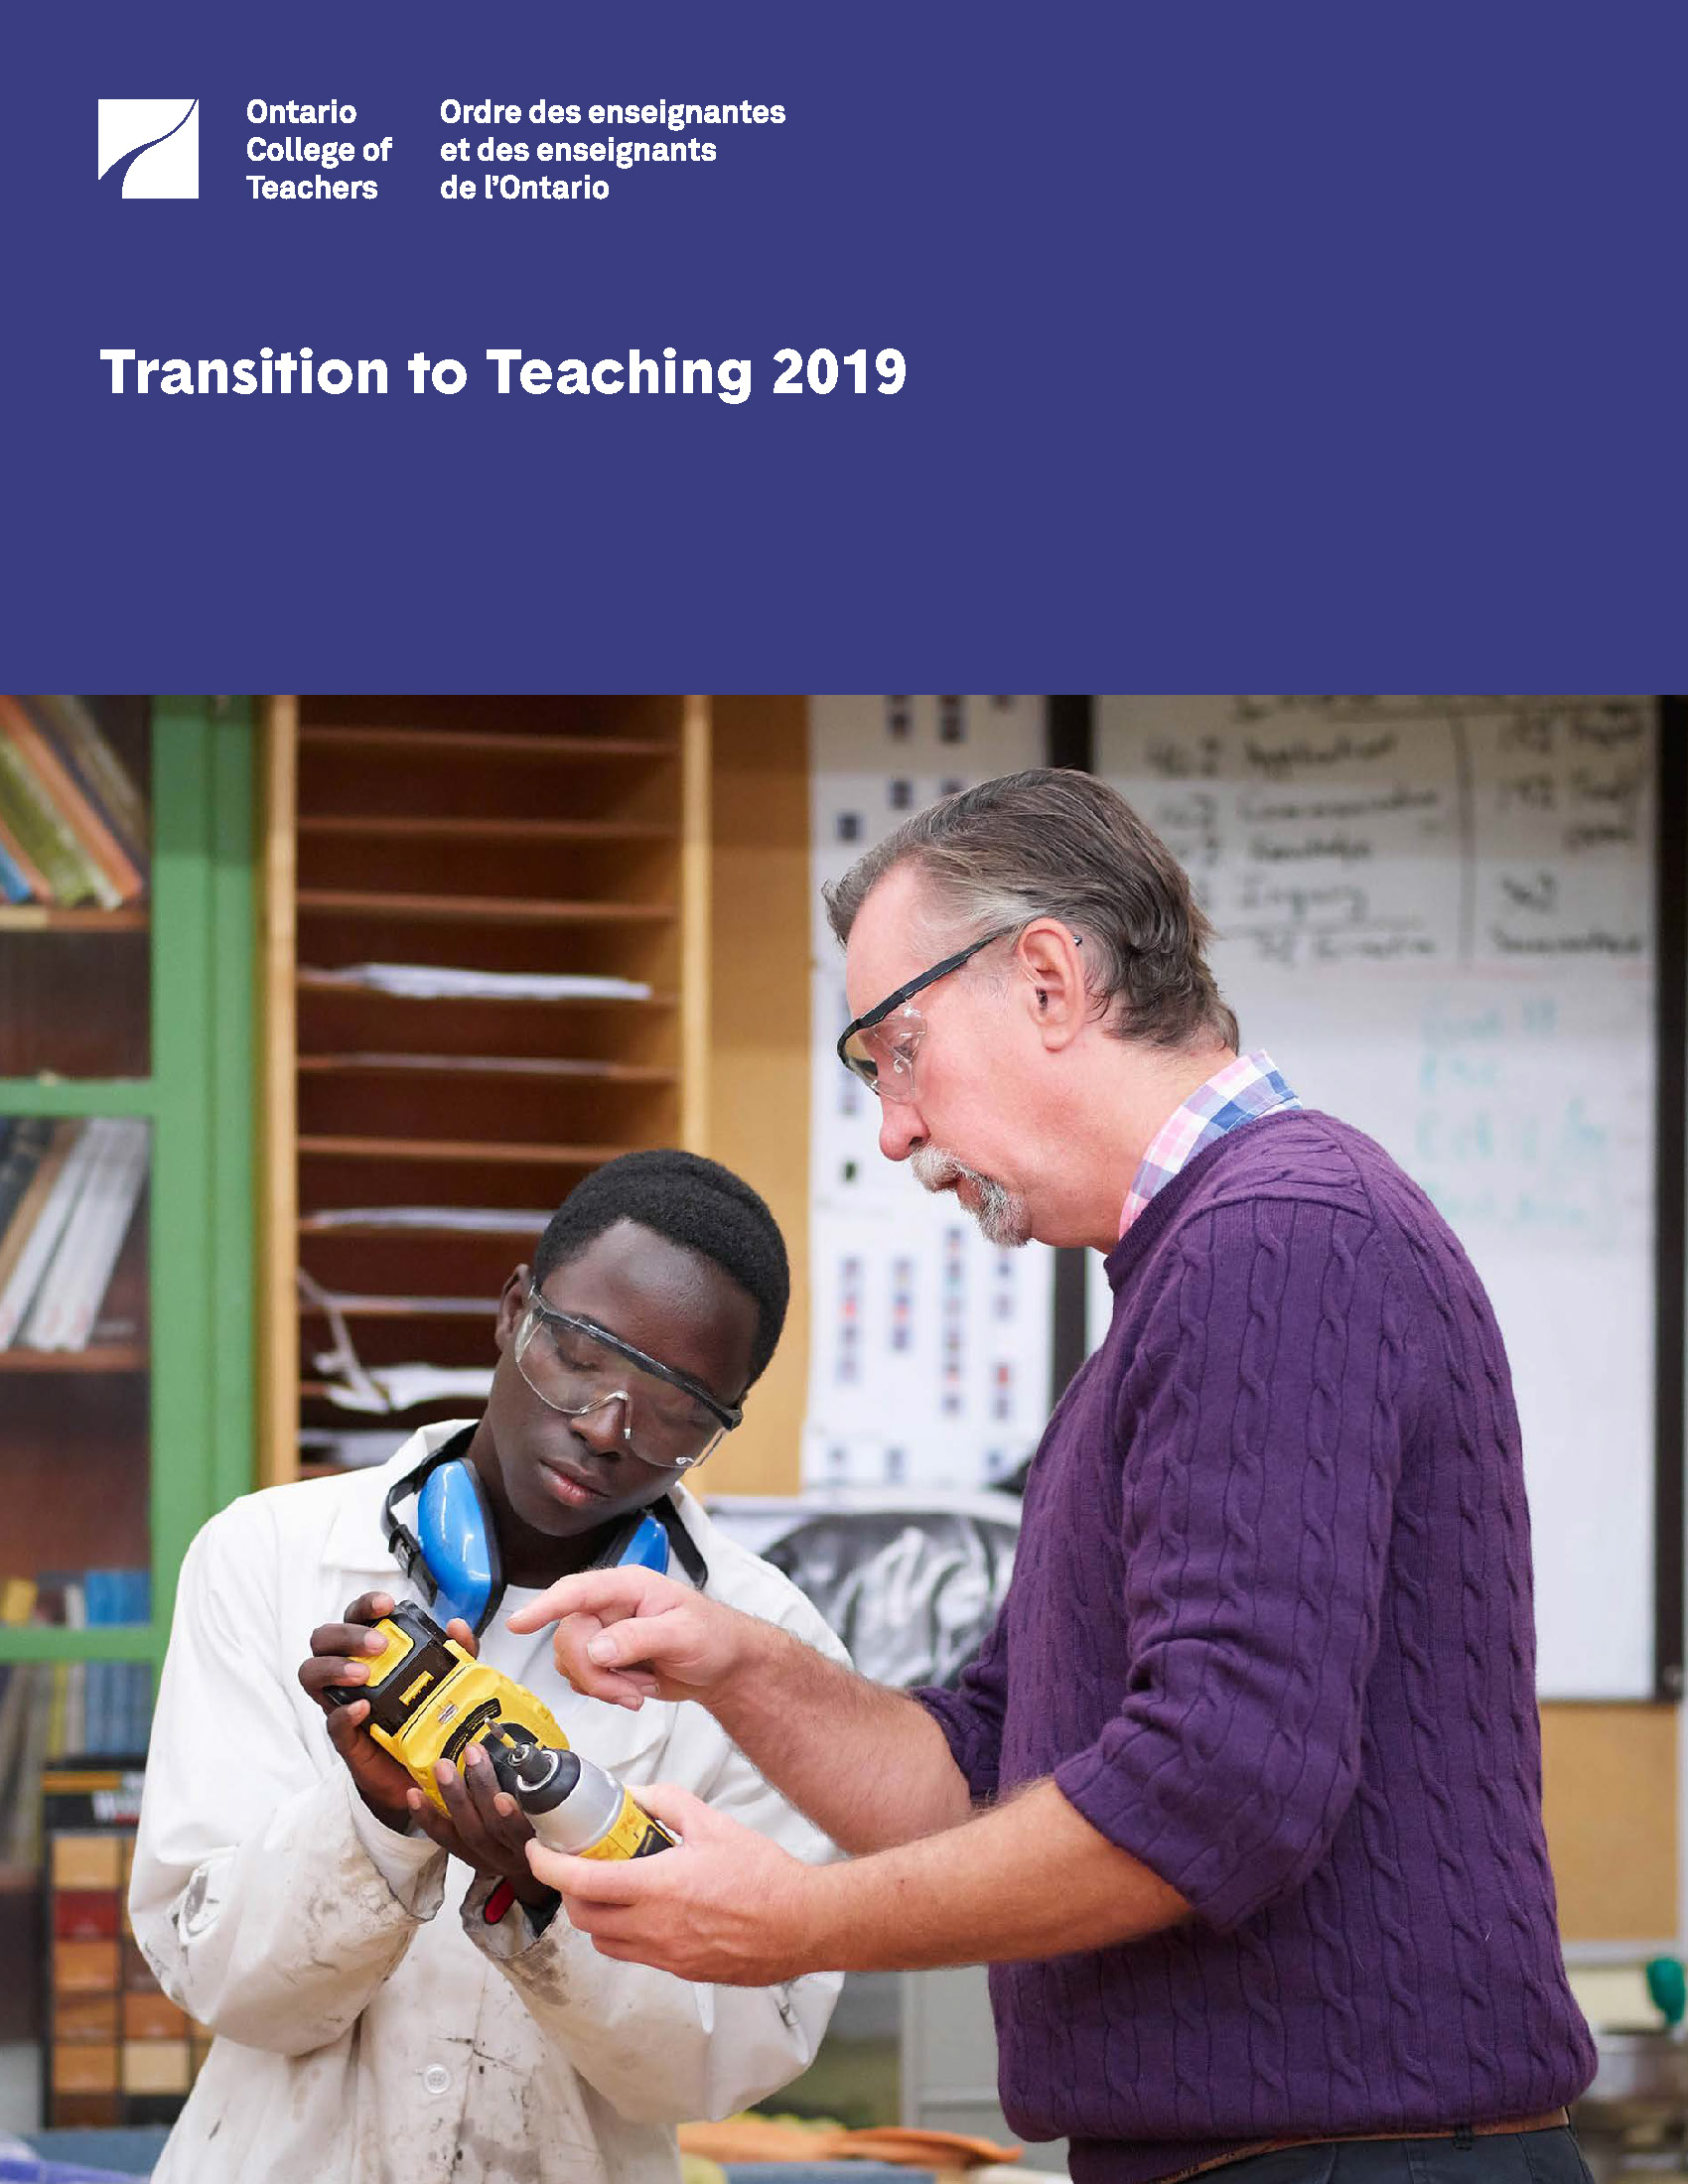 Transition to Teaching 2019